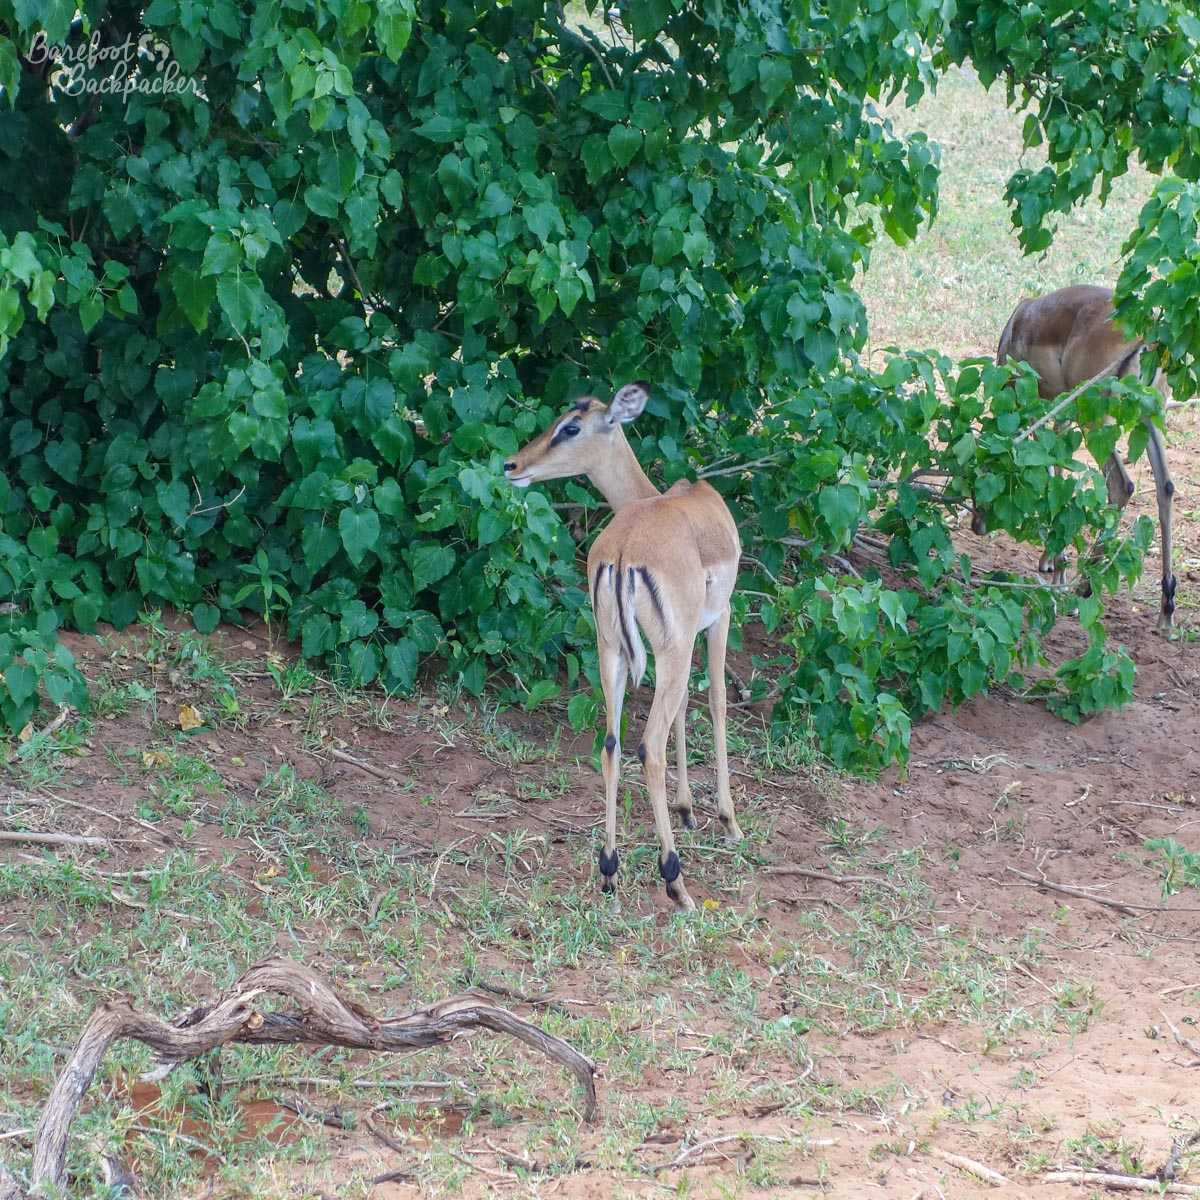 A deer, or possibly an eland or kudu. I've no idea. Probably more commonly known as 'fast food'?